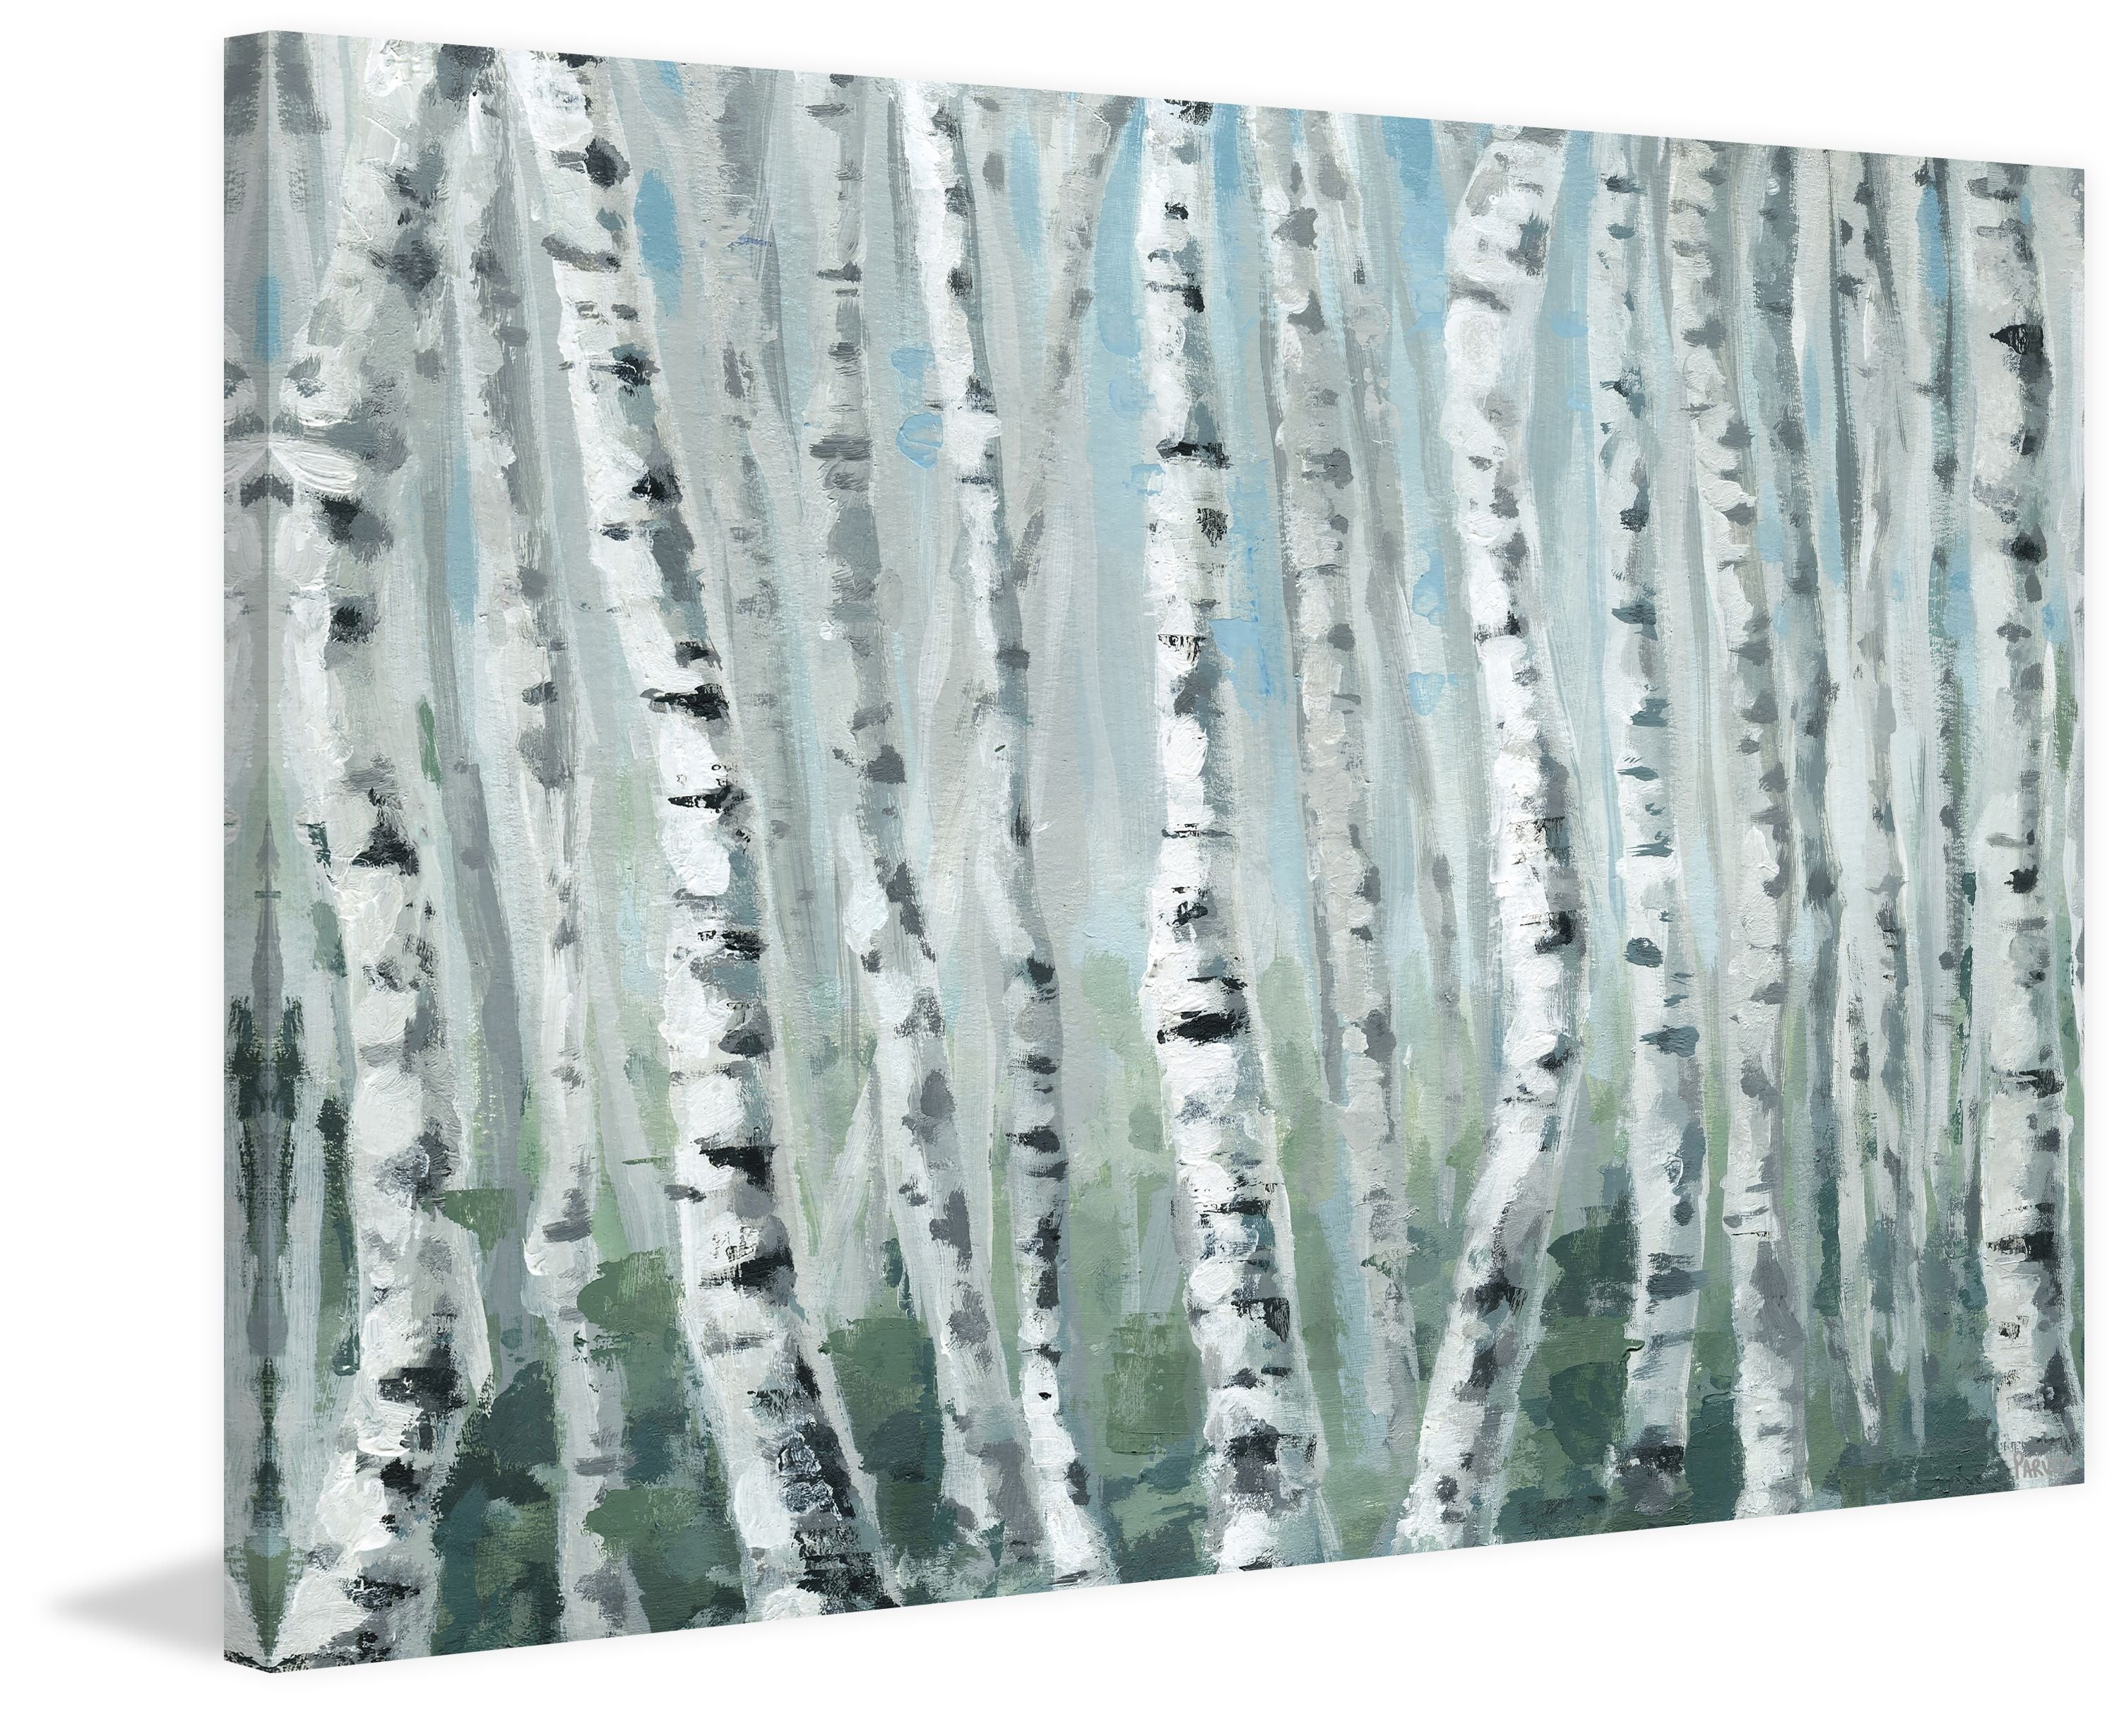 White Birch Bark "Tree Trunks" Tissue Paper for Gift Wrapping 20"x30" Sheets 